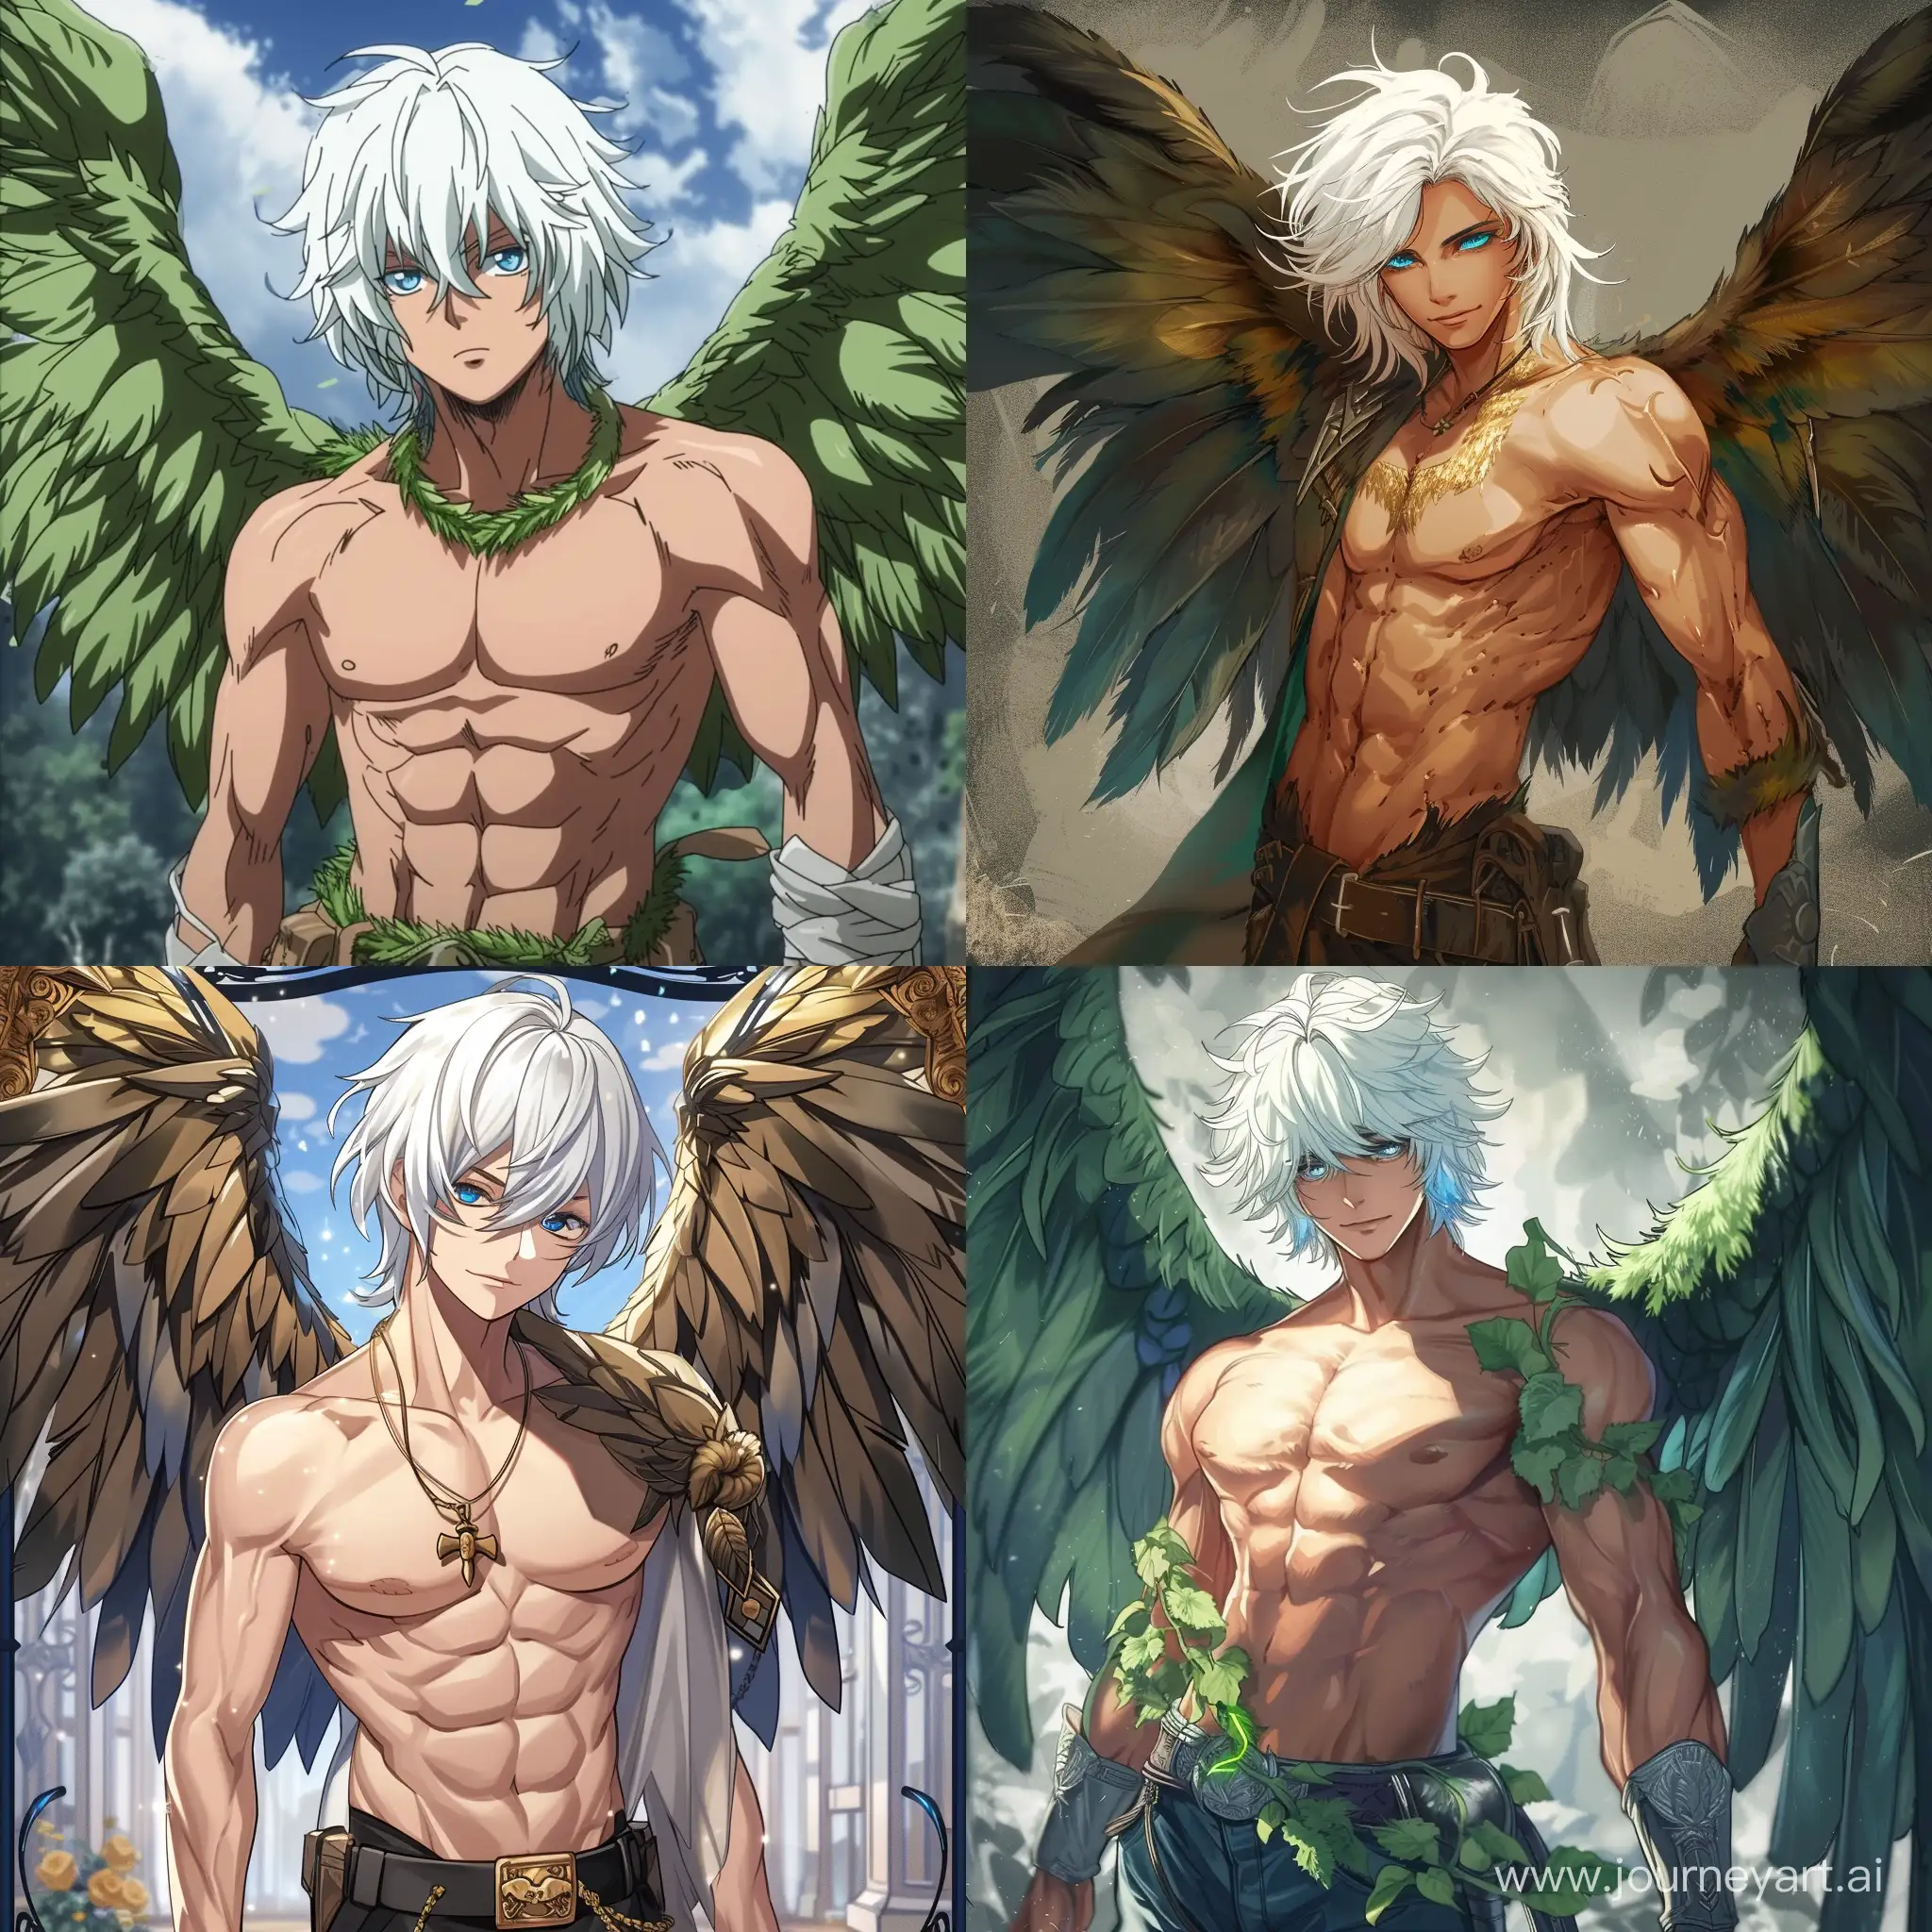 White hair, blue eyes, a problematic body, an army commander, has gras wings